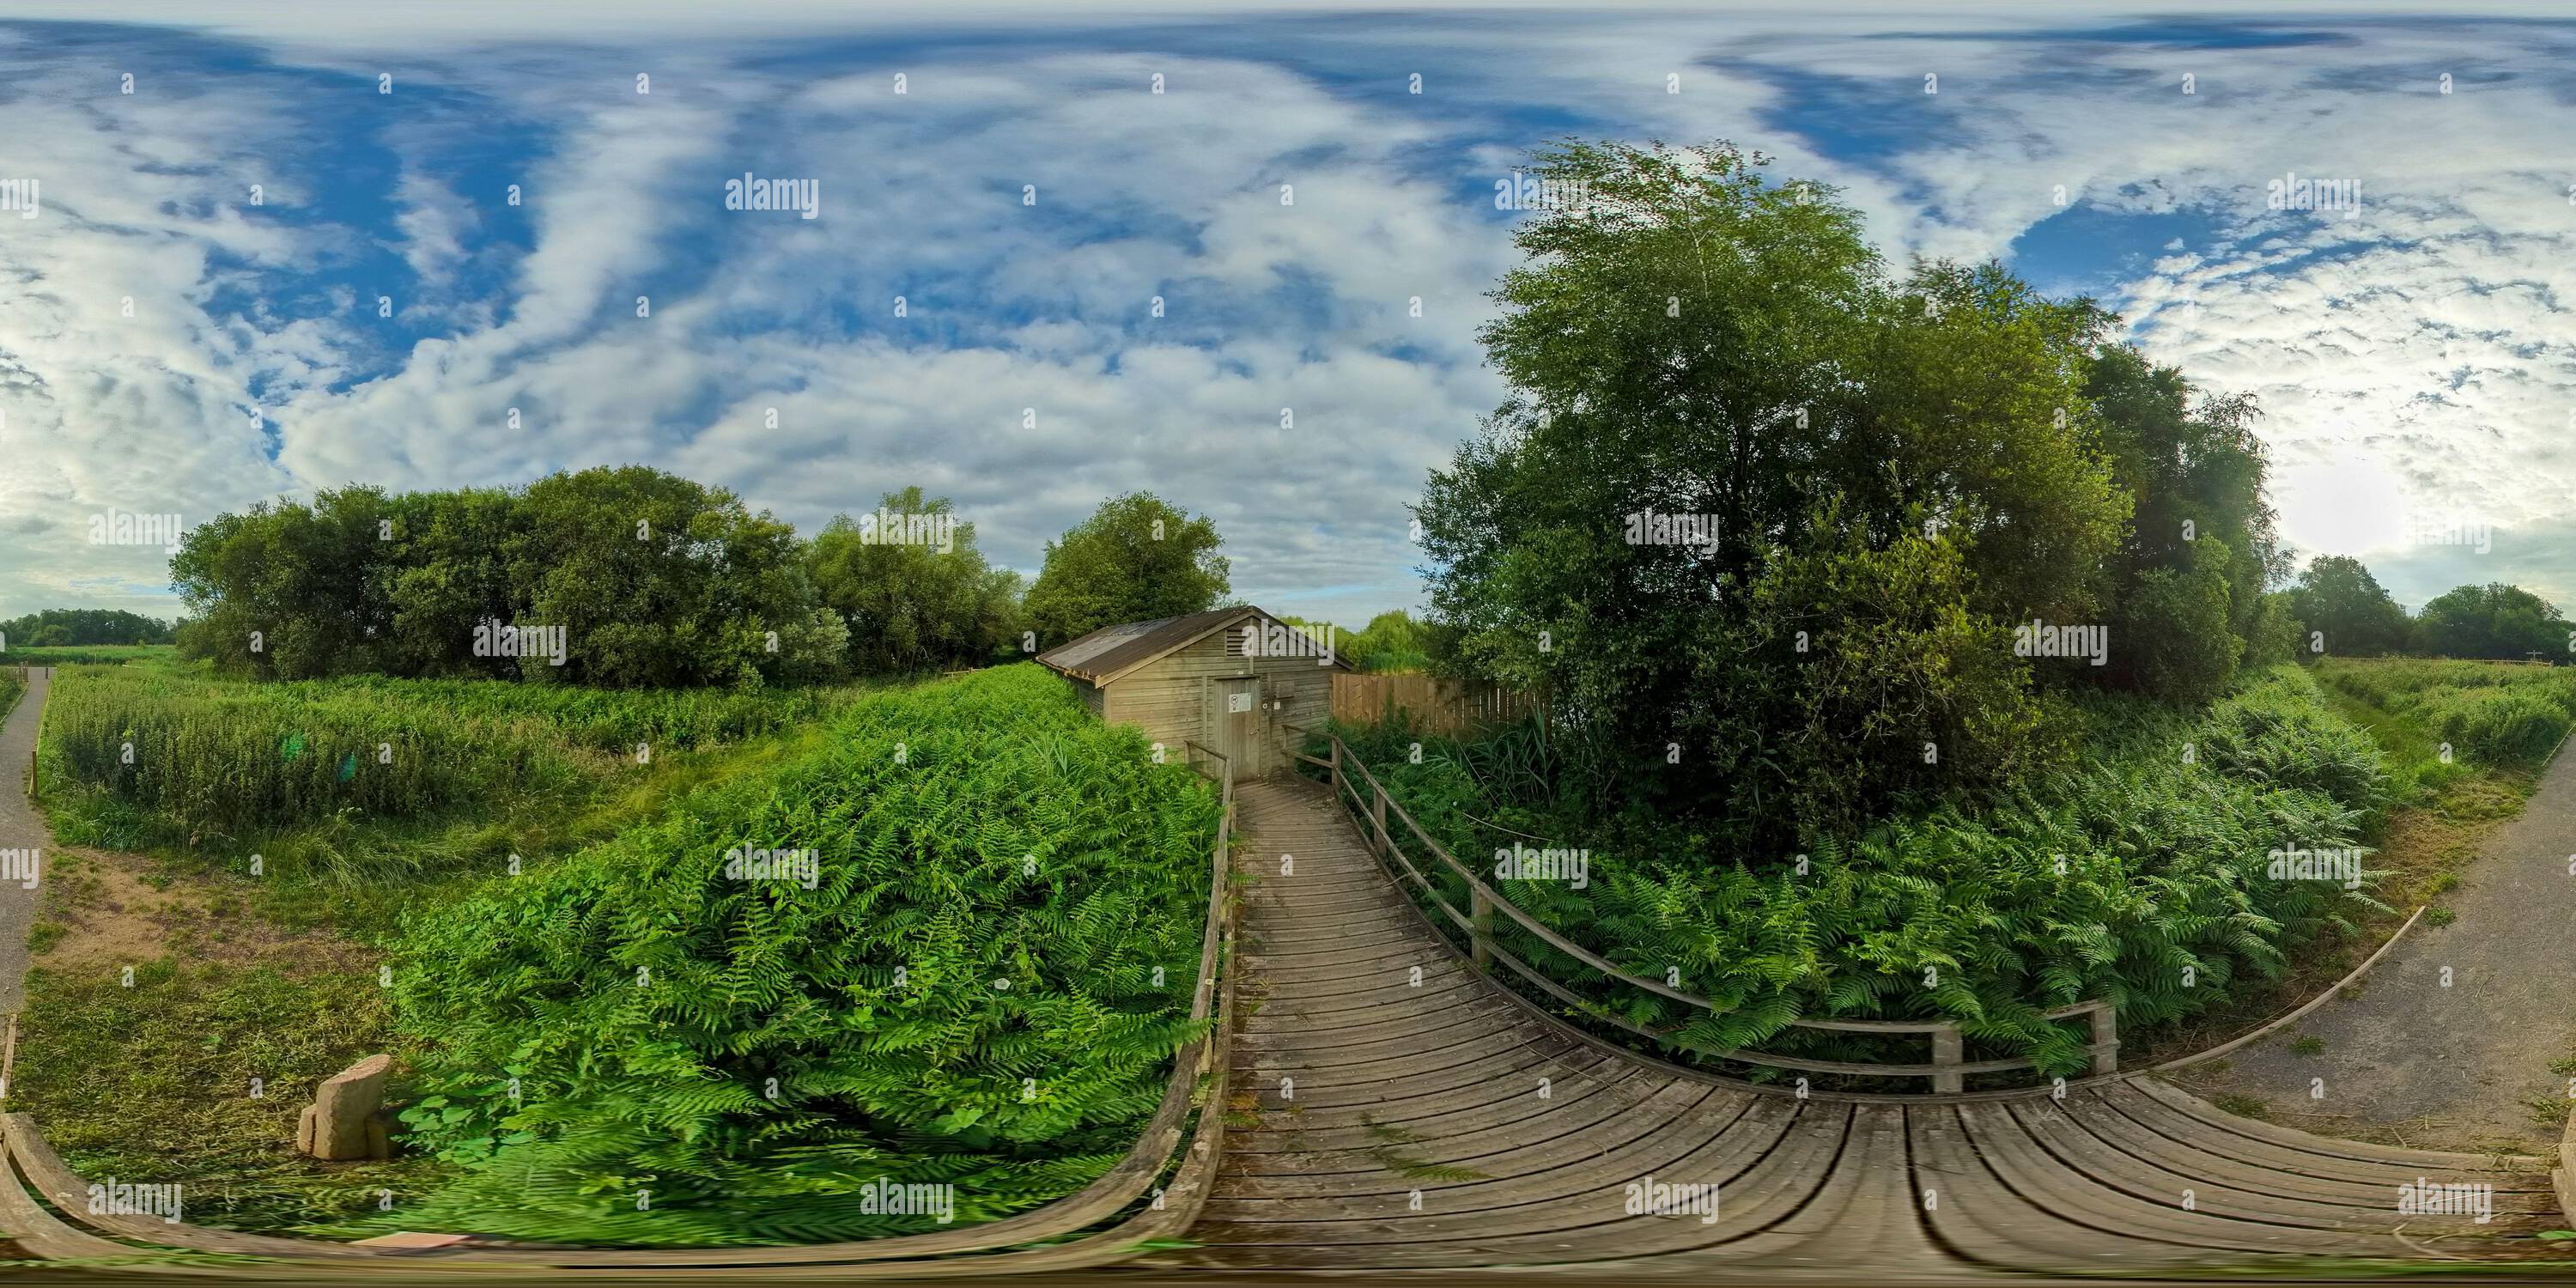 360 degree panoramic view of Above Wooden Entrance to Viridor Hide in Westhay Moor National Nature Reserve